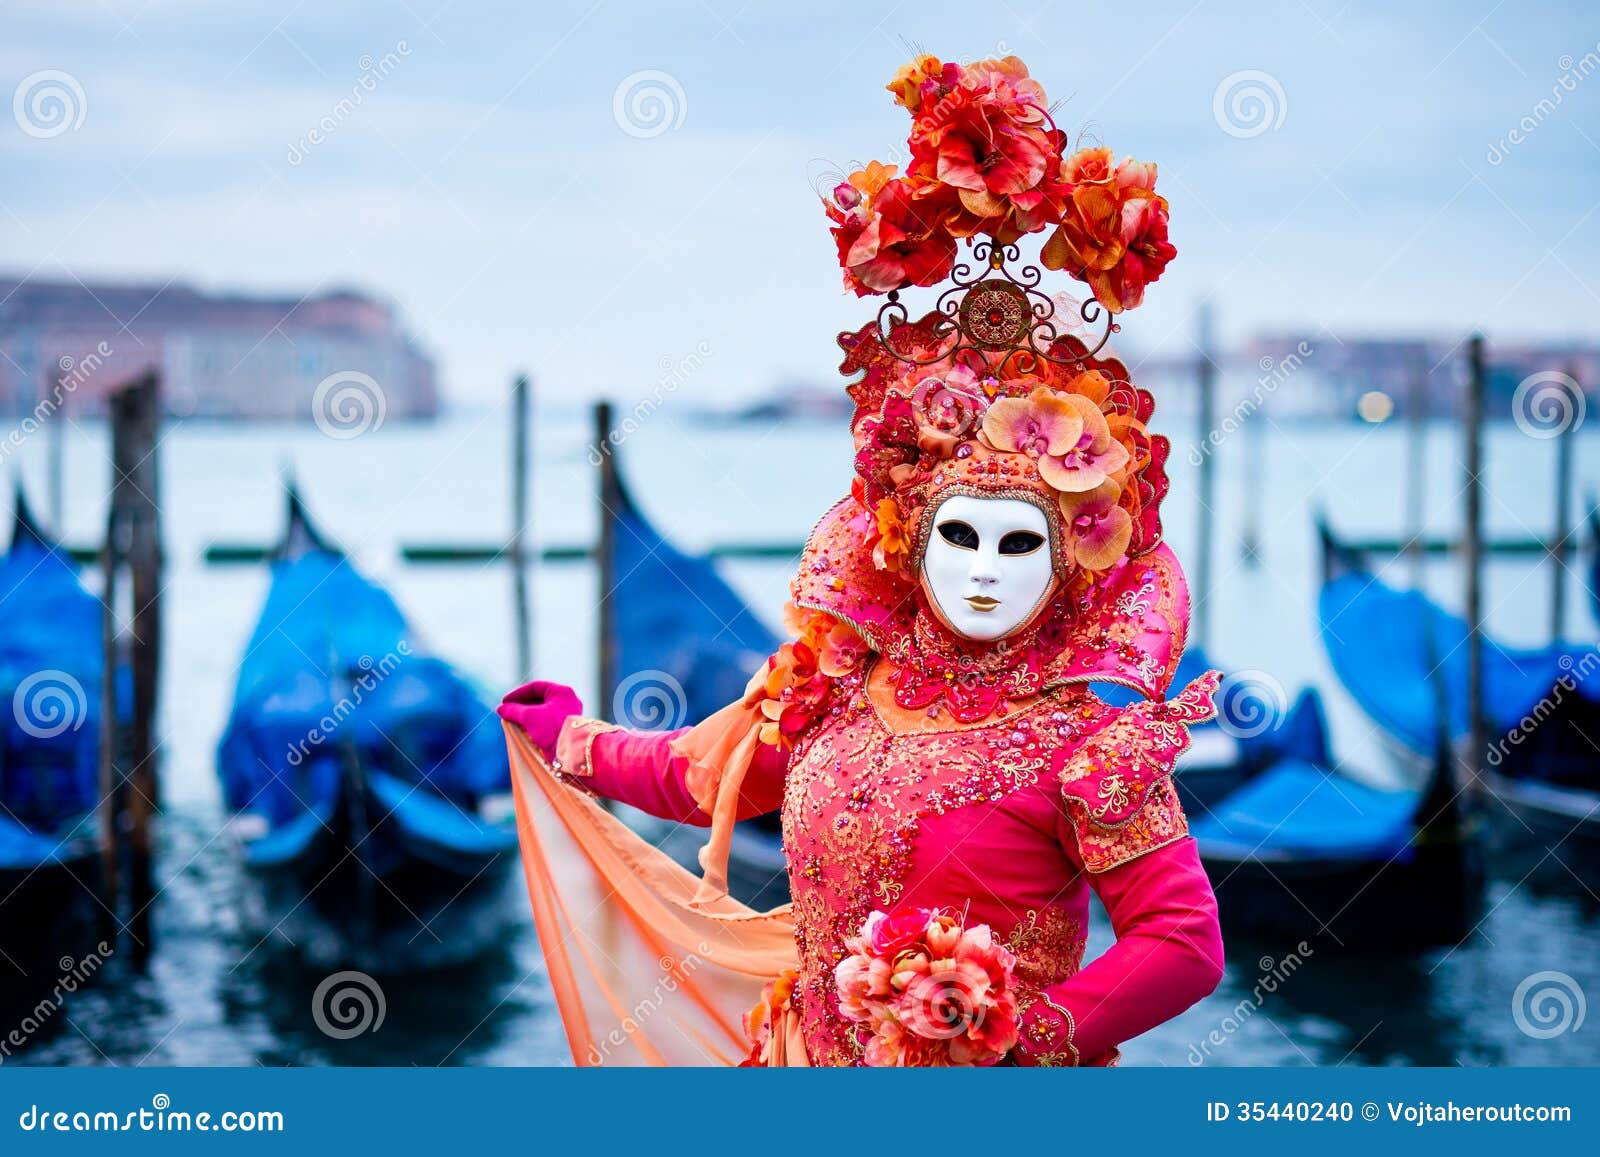 woman in red dress masked for venice carnival in front of typical gondola boats